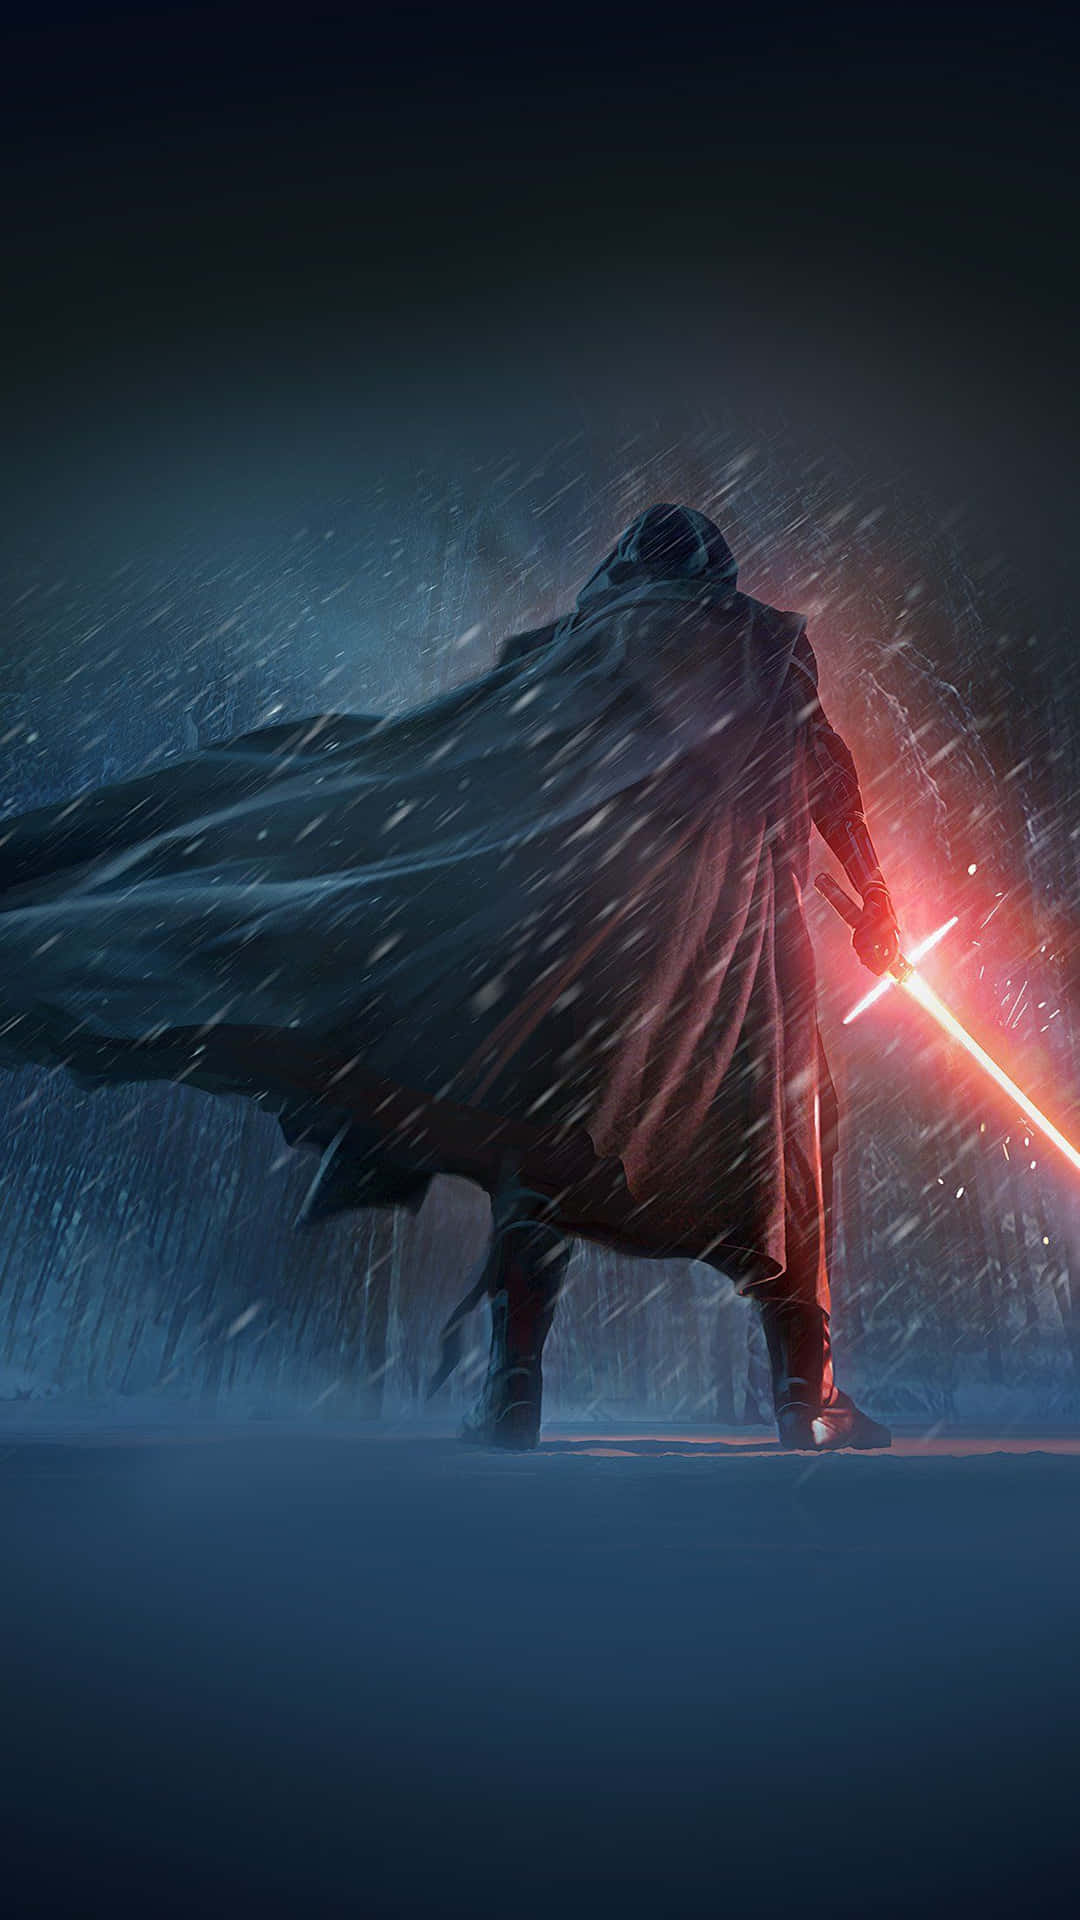 Show the world your dark side with the Darth Vader iPhone Wallpaper